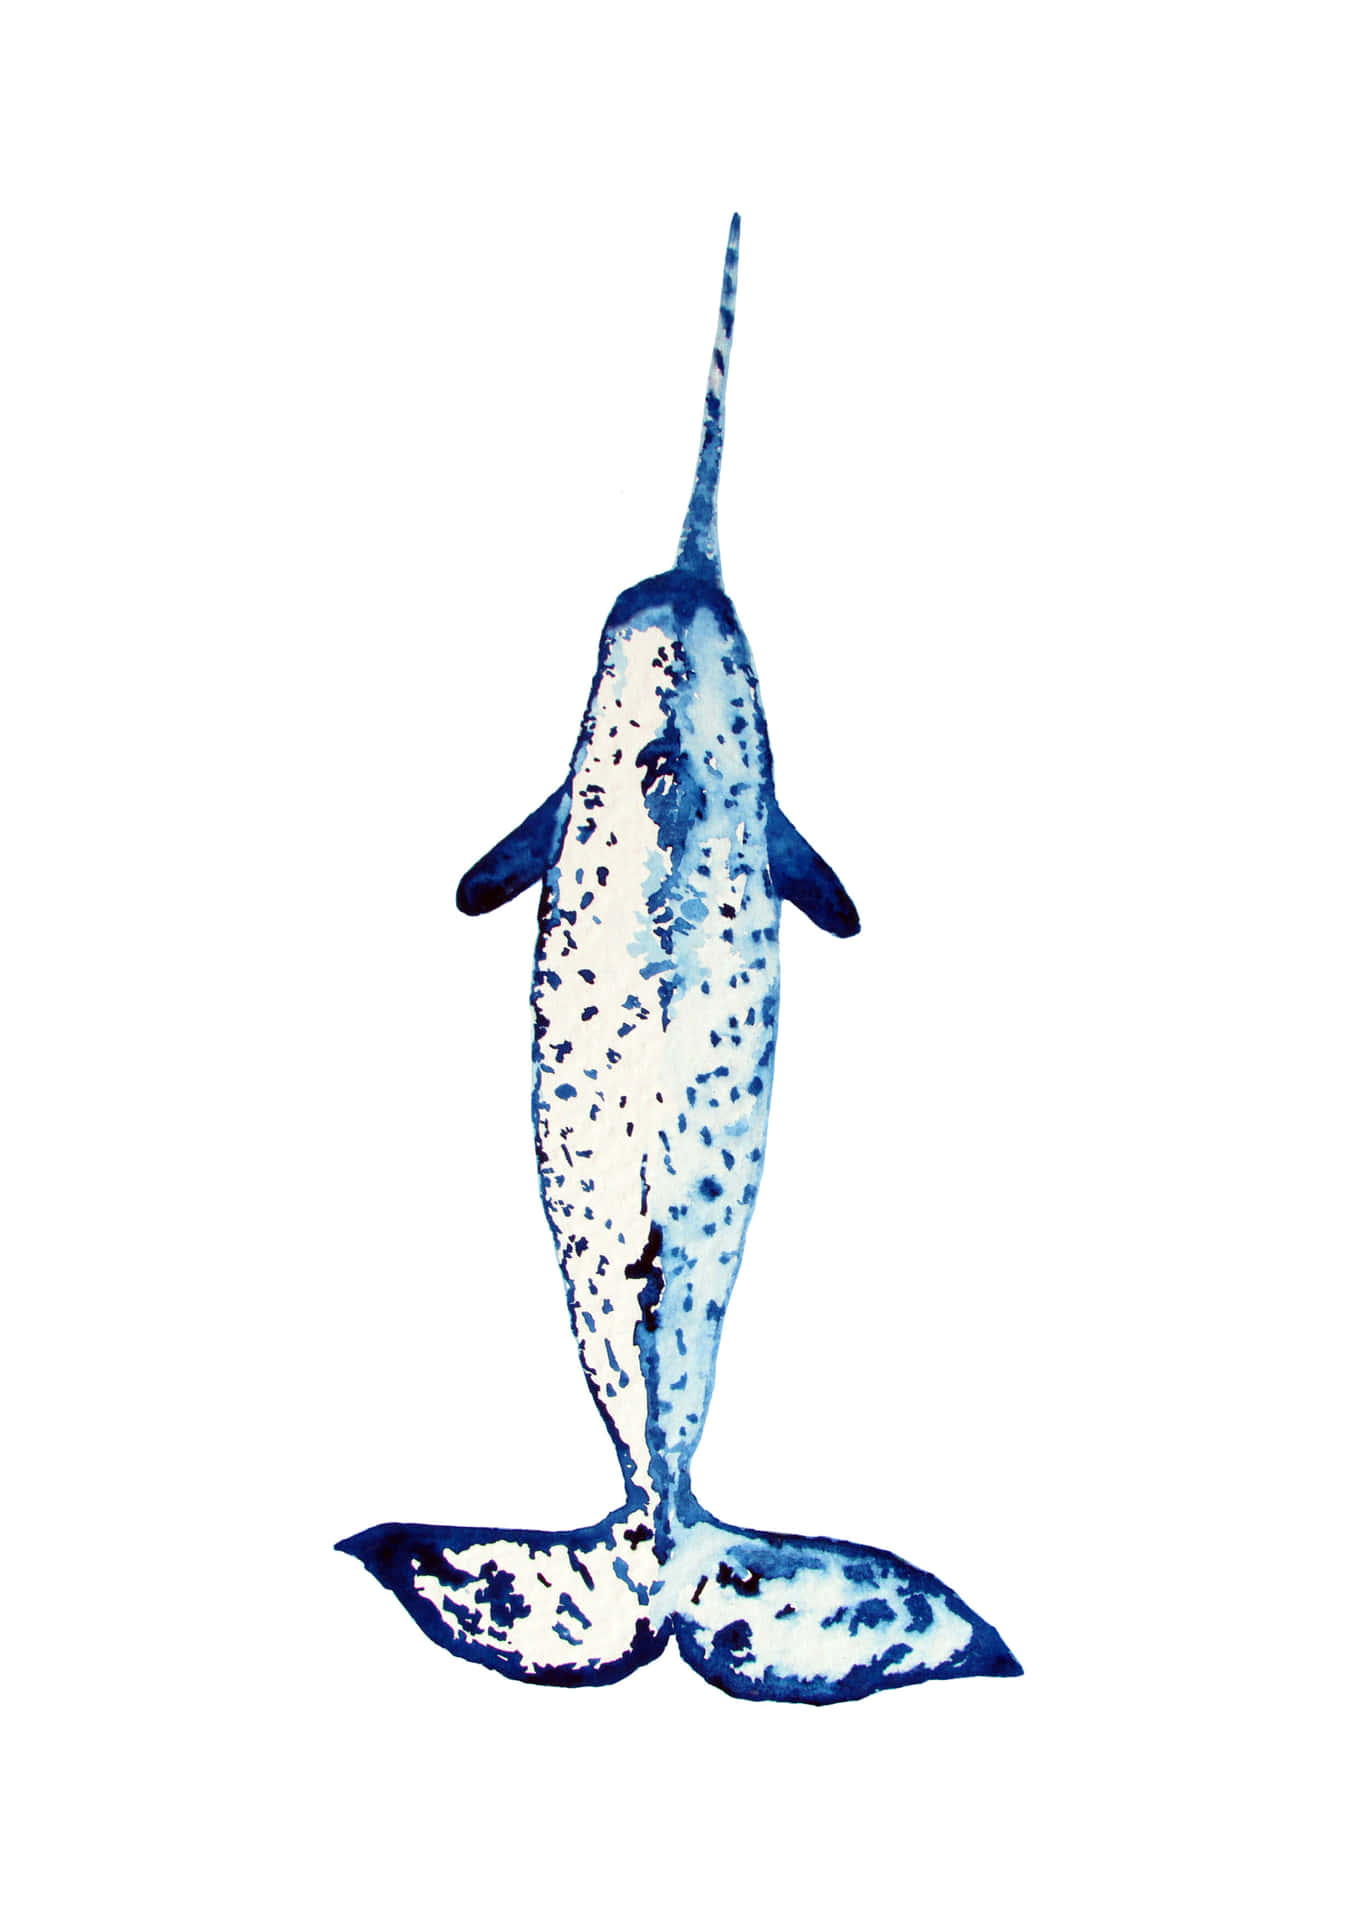 A majestic Narwhal swimming in the deep sea.